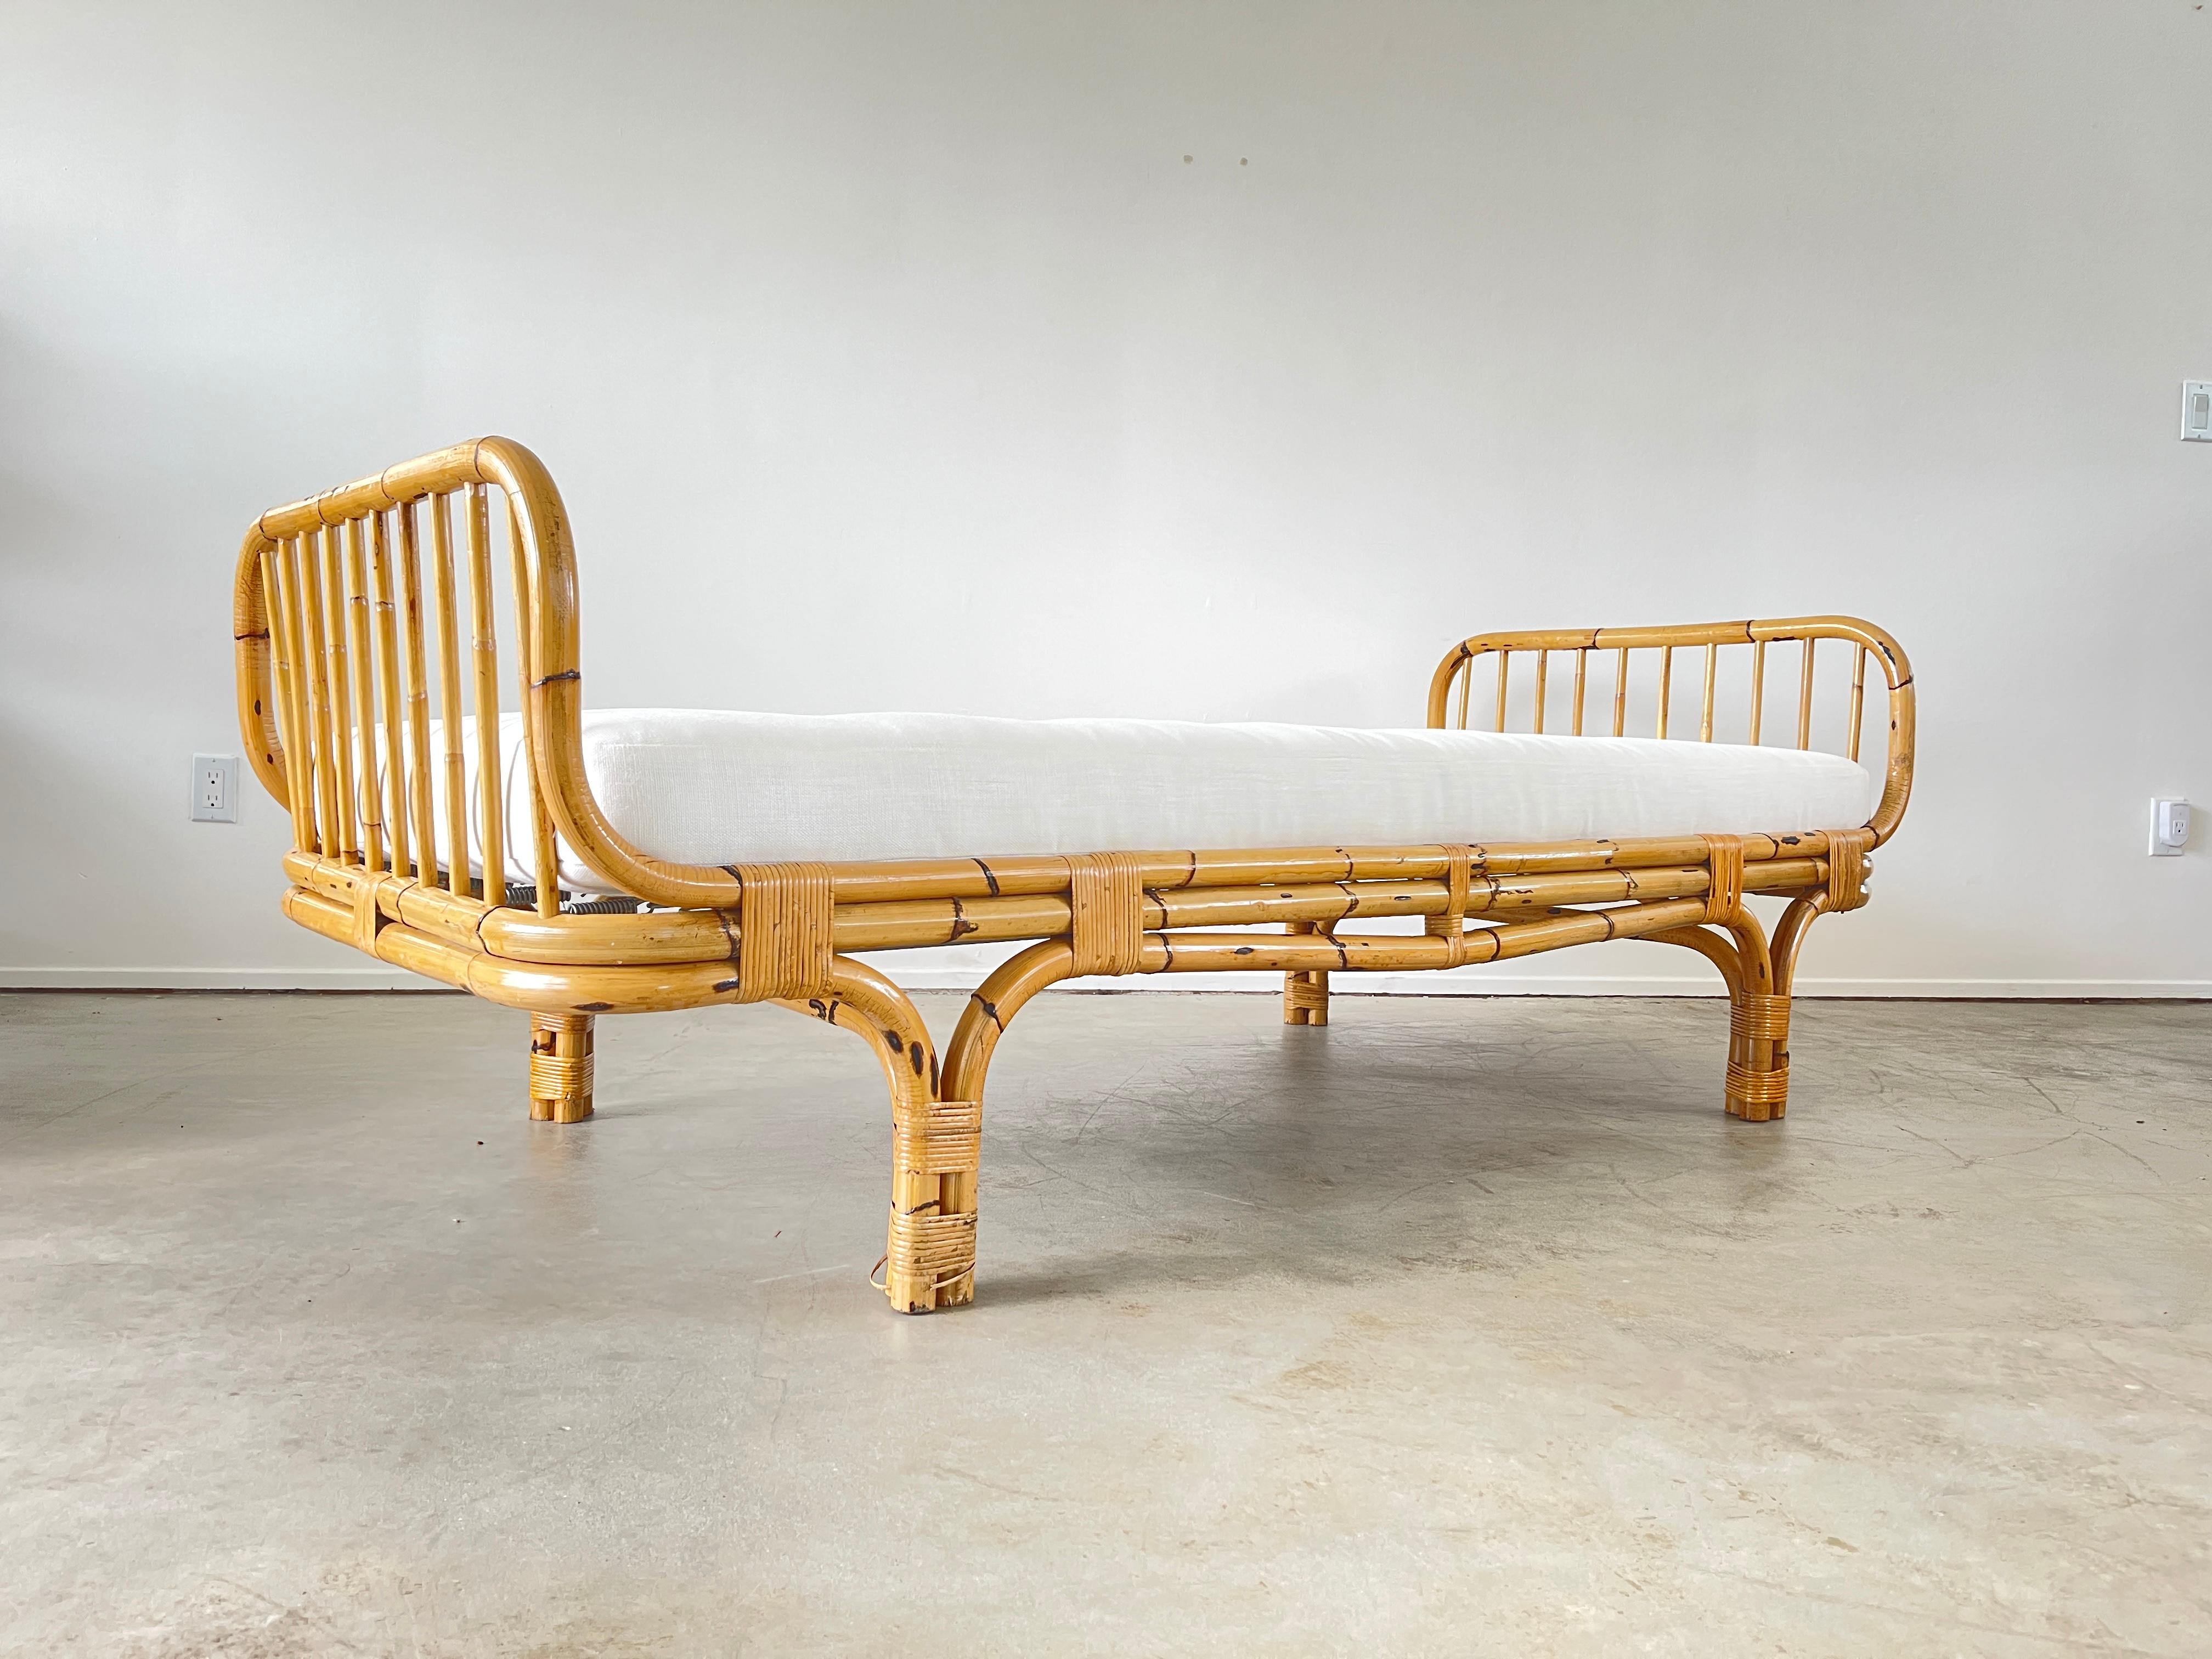 Italian bamboo daybed.
Reupholstered in crisp white linen. 
Sculptural bamboo headrest and footrest.

 